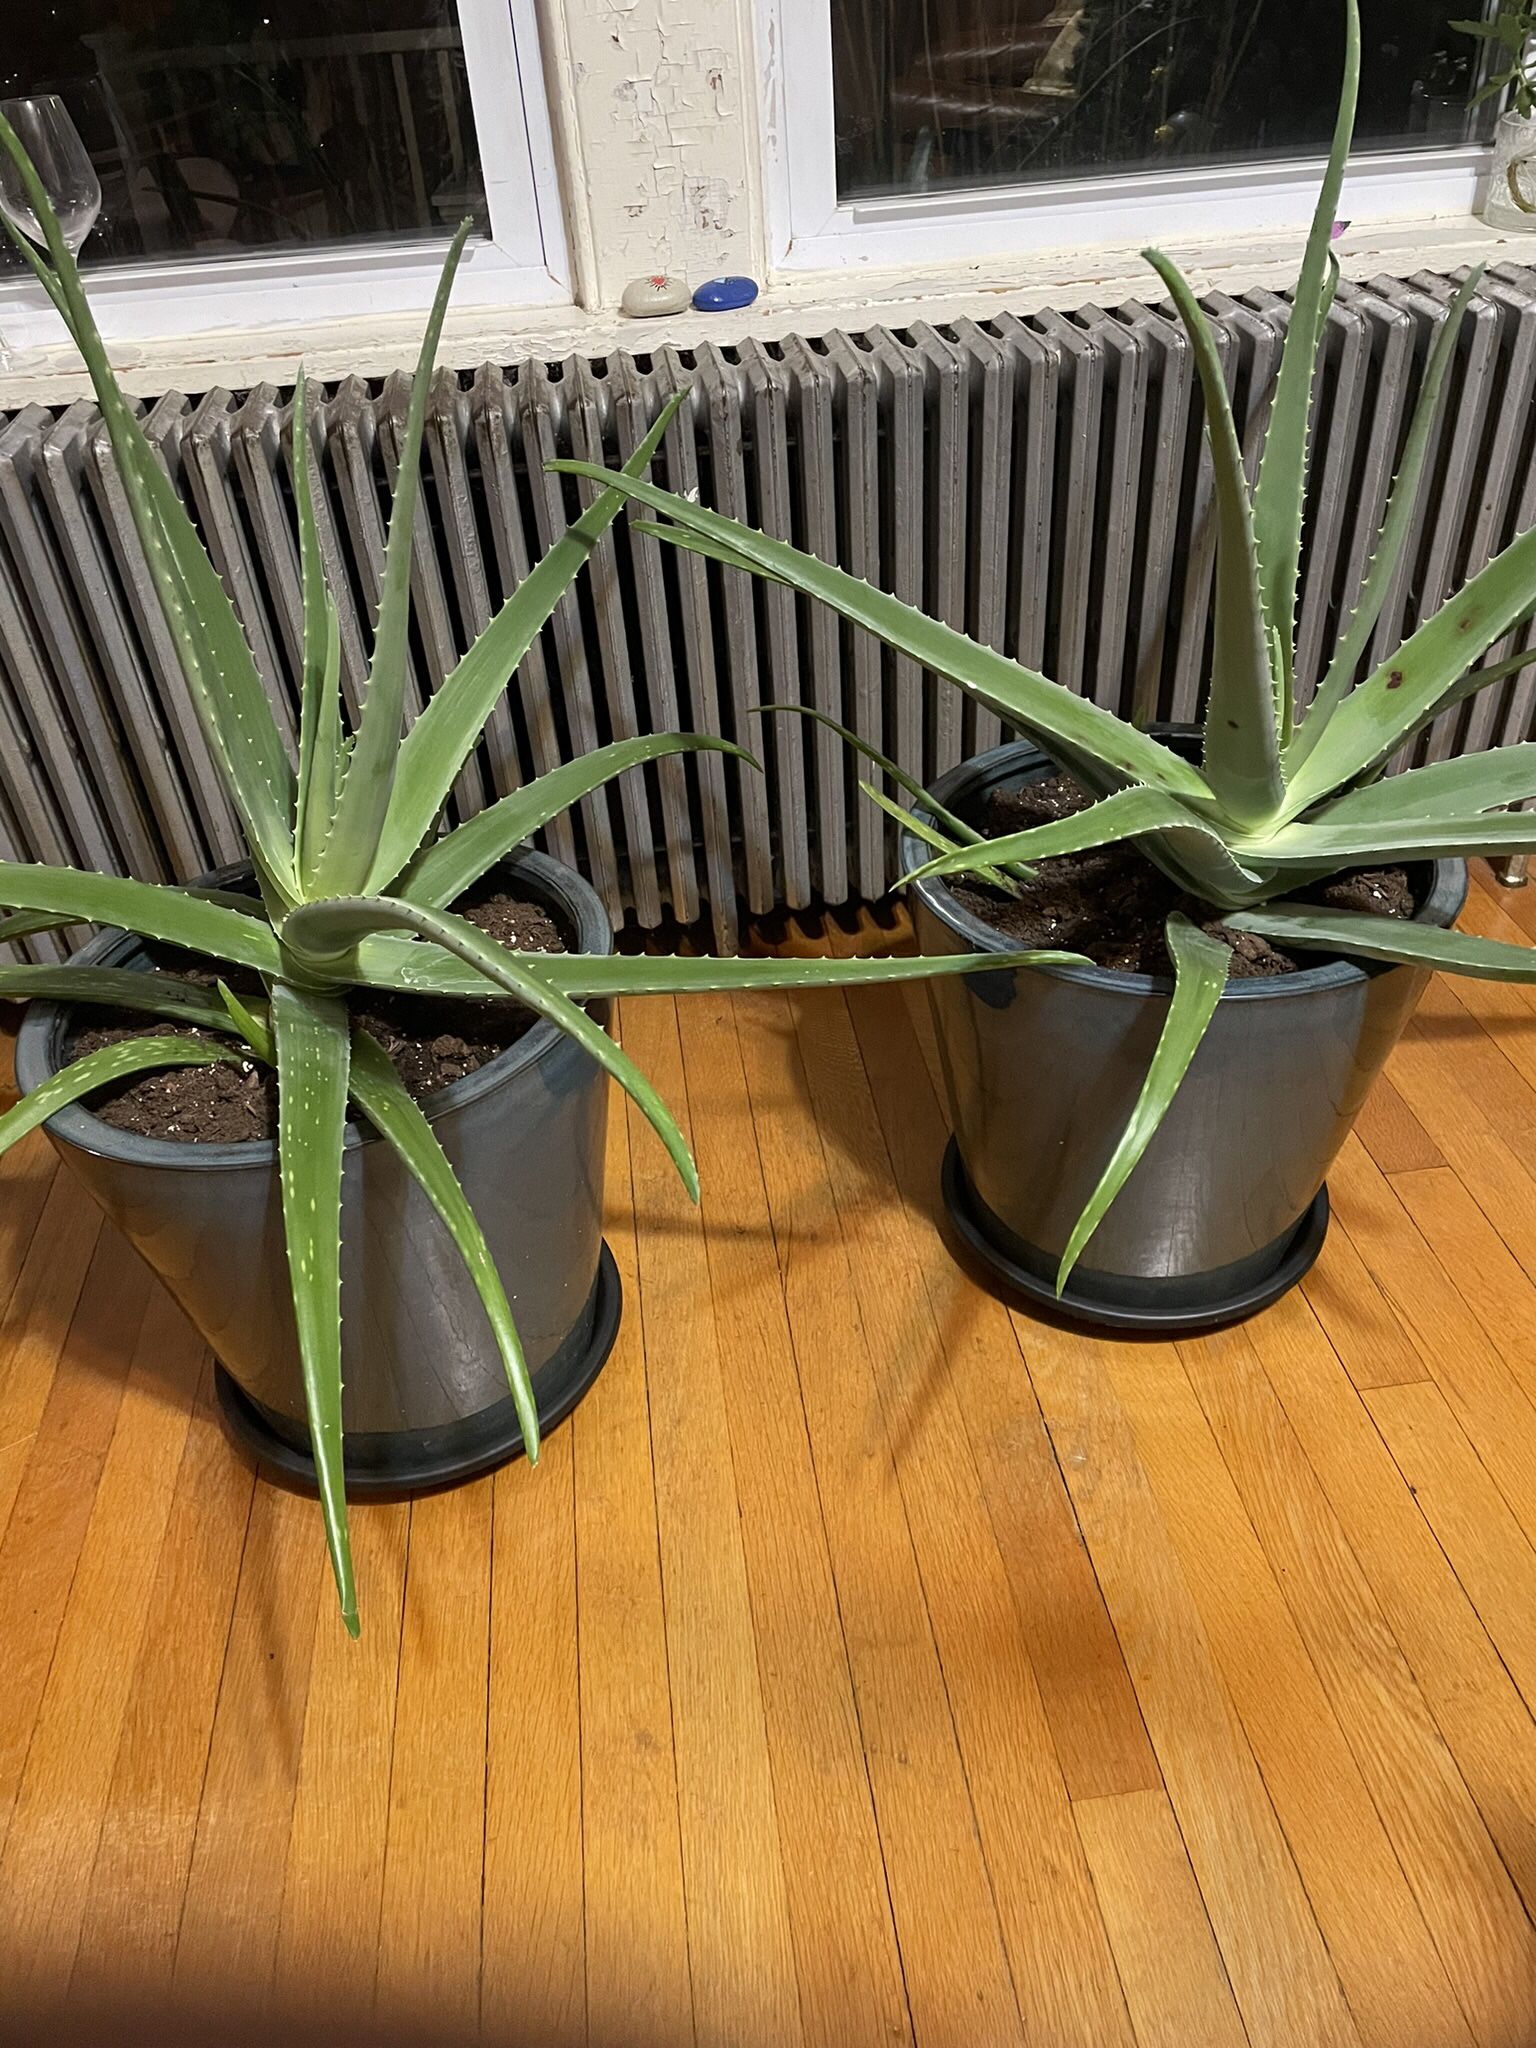 Two Very Large Aloe Plants In Nice Pots